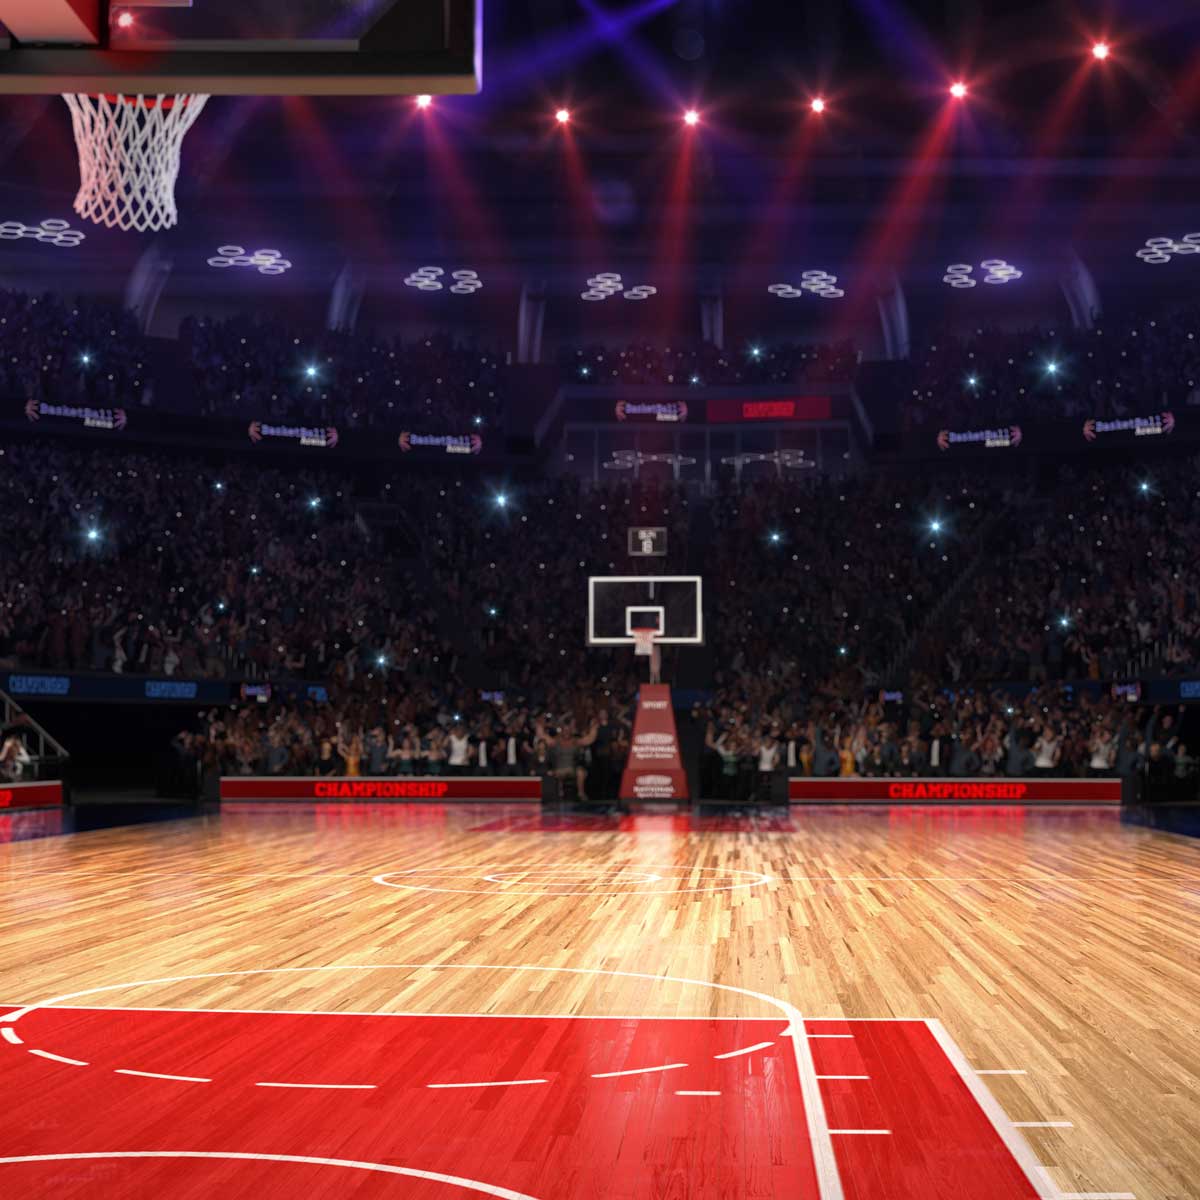 Basketball-court-with-fans-in-the-background.-Sports-arena-landscape